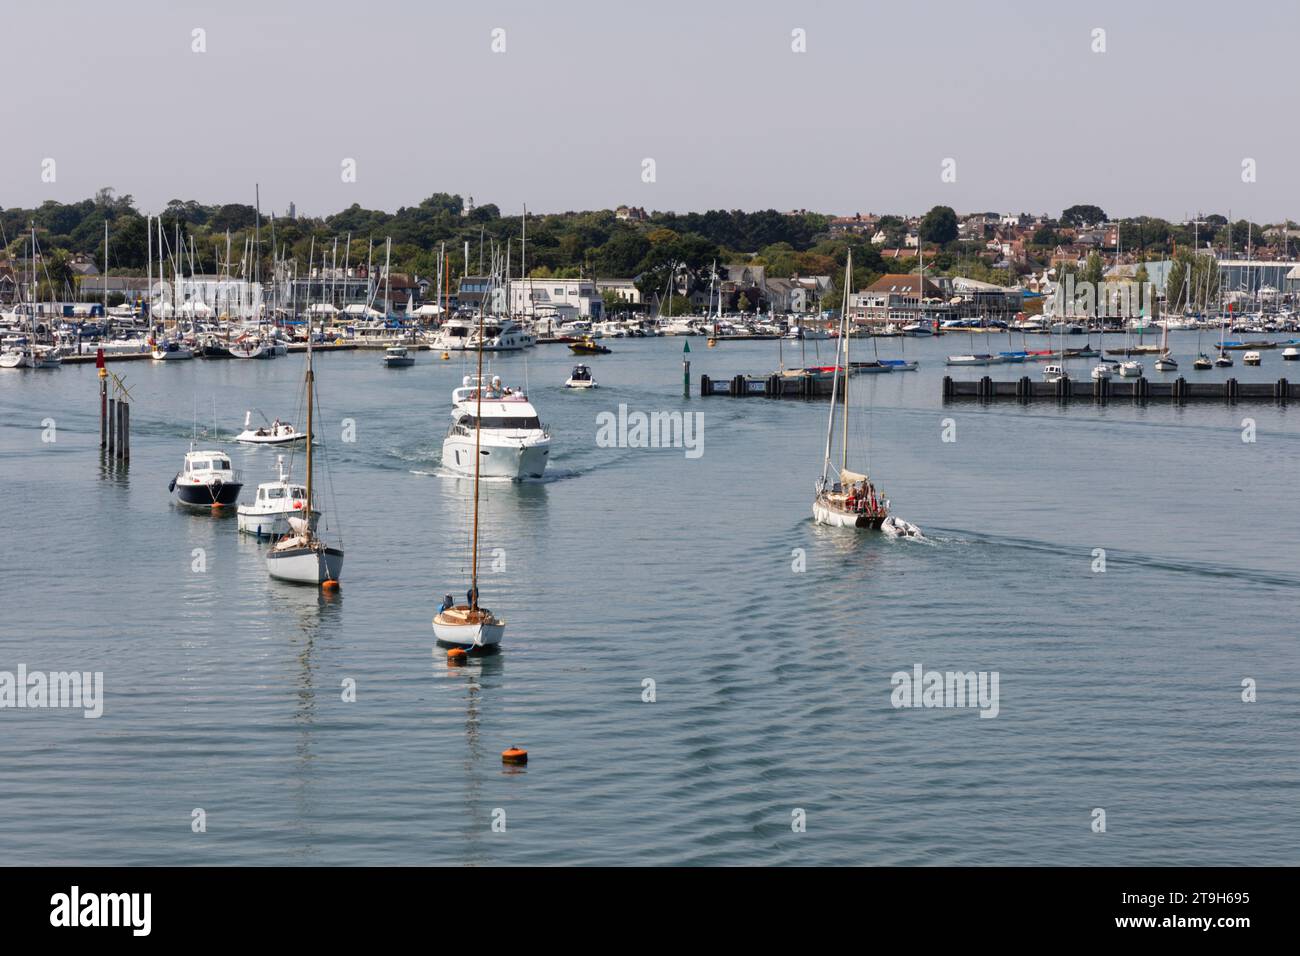 Lymington harbour on The Solent in Hampshire, United Kingdom Stock Photo